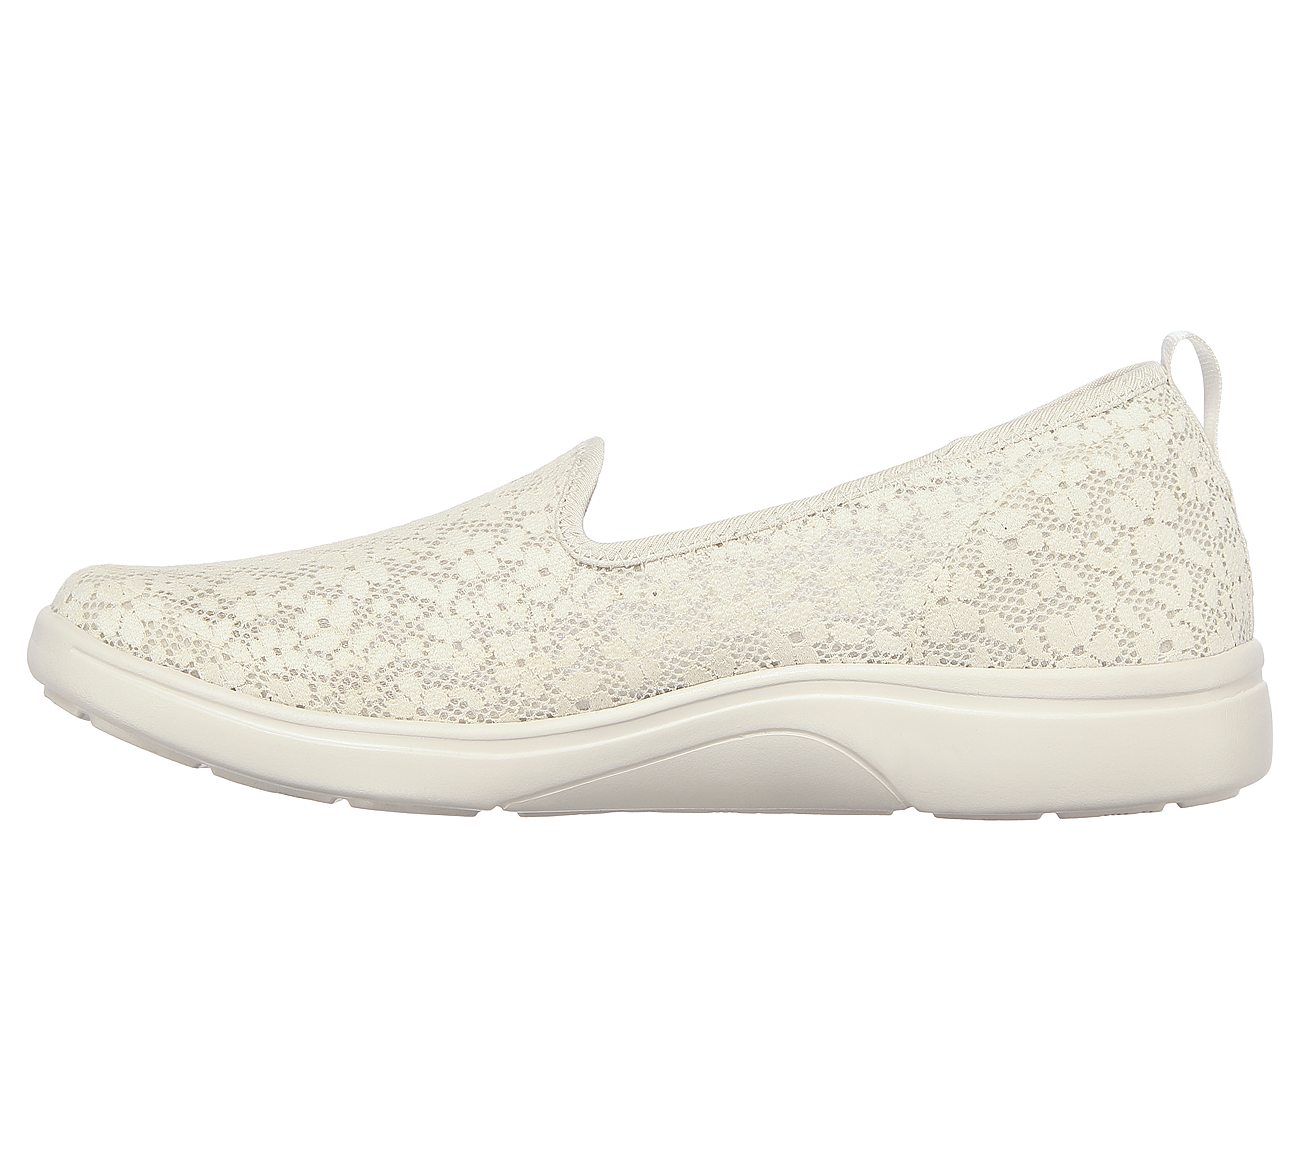 ARCH FIT UPLIFT - ROMANTIC, NATURAL Footwear Left View